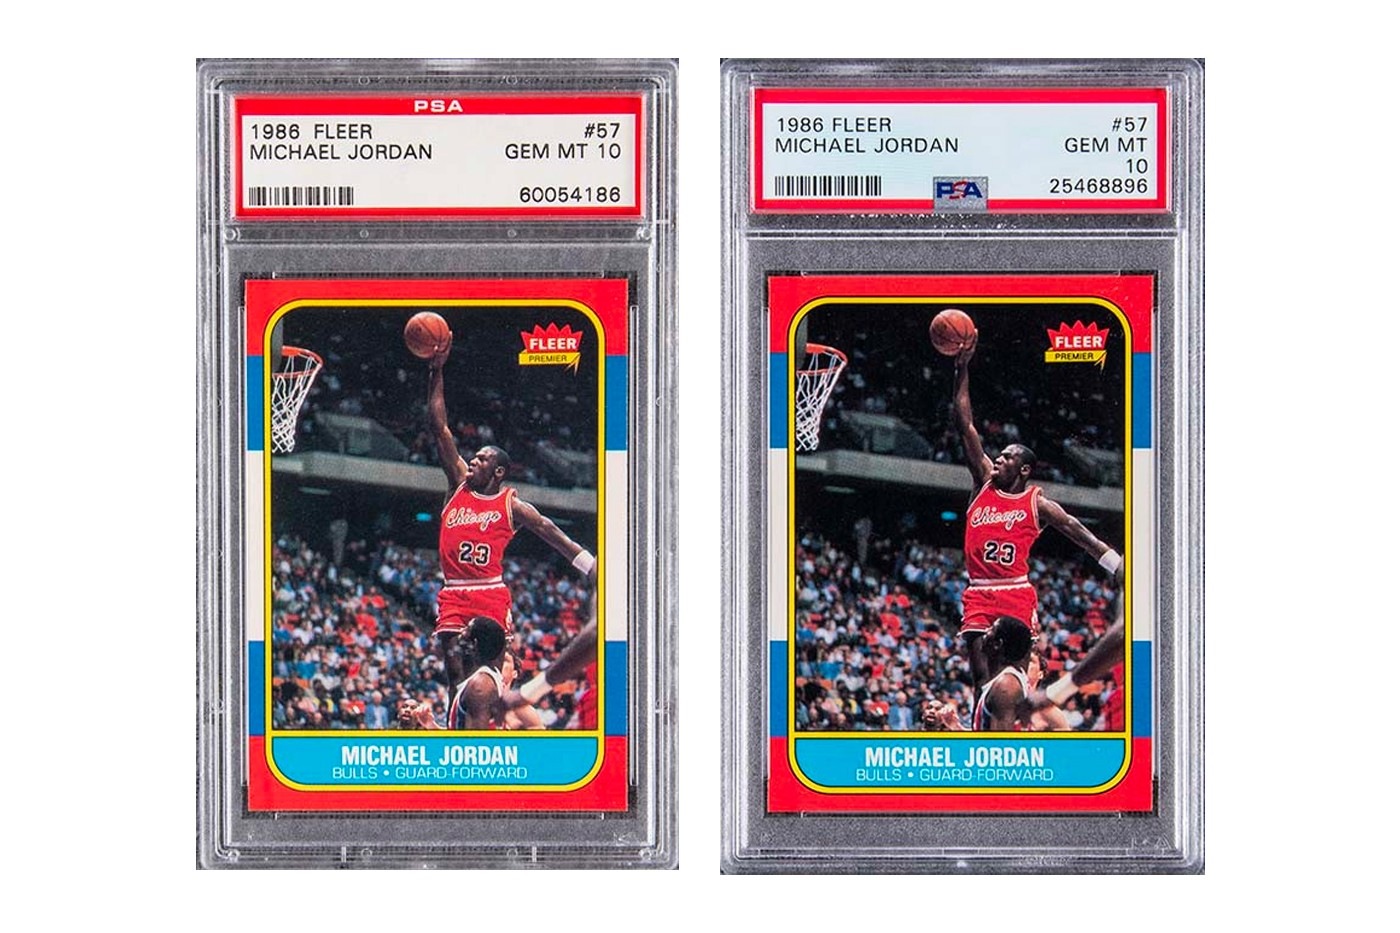 Michael Jordan trading cards fetched a high price.